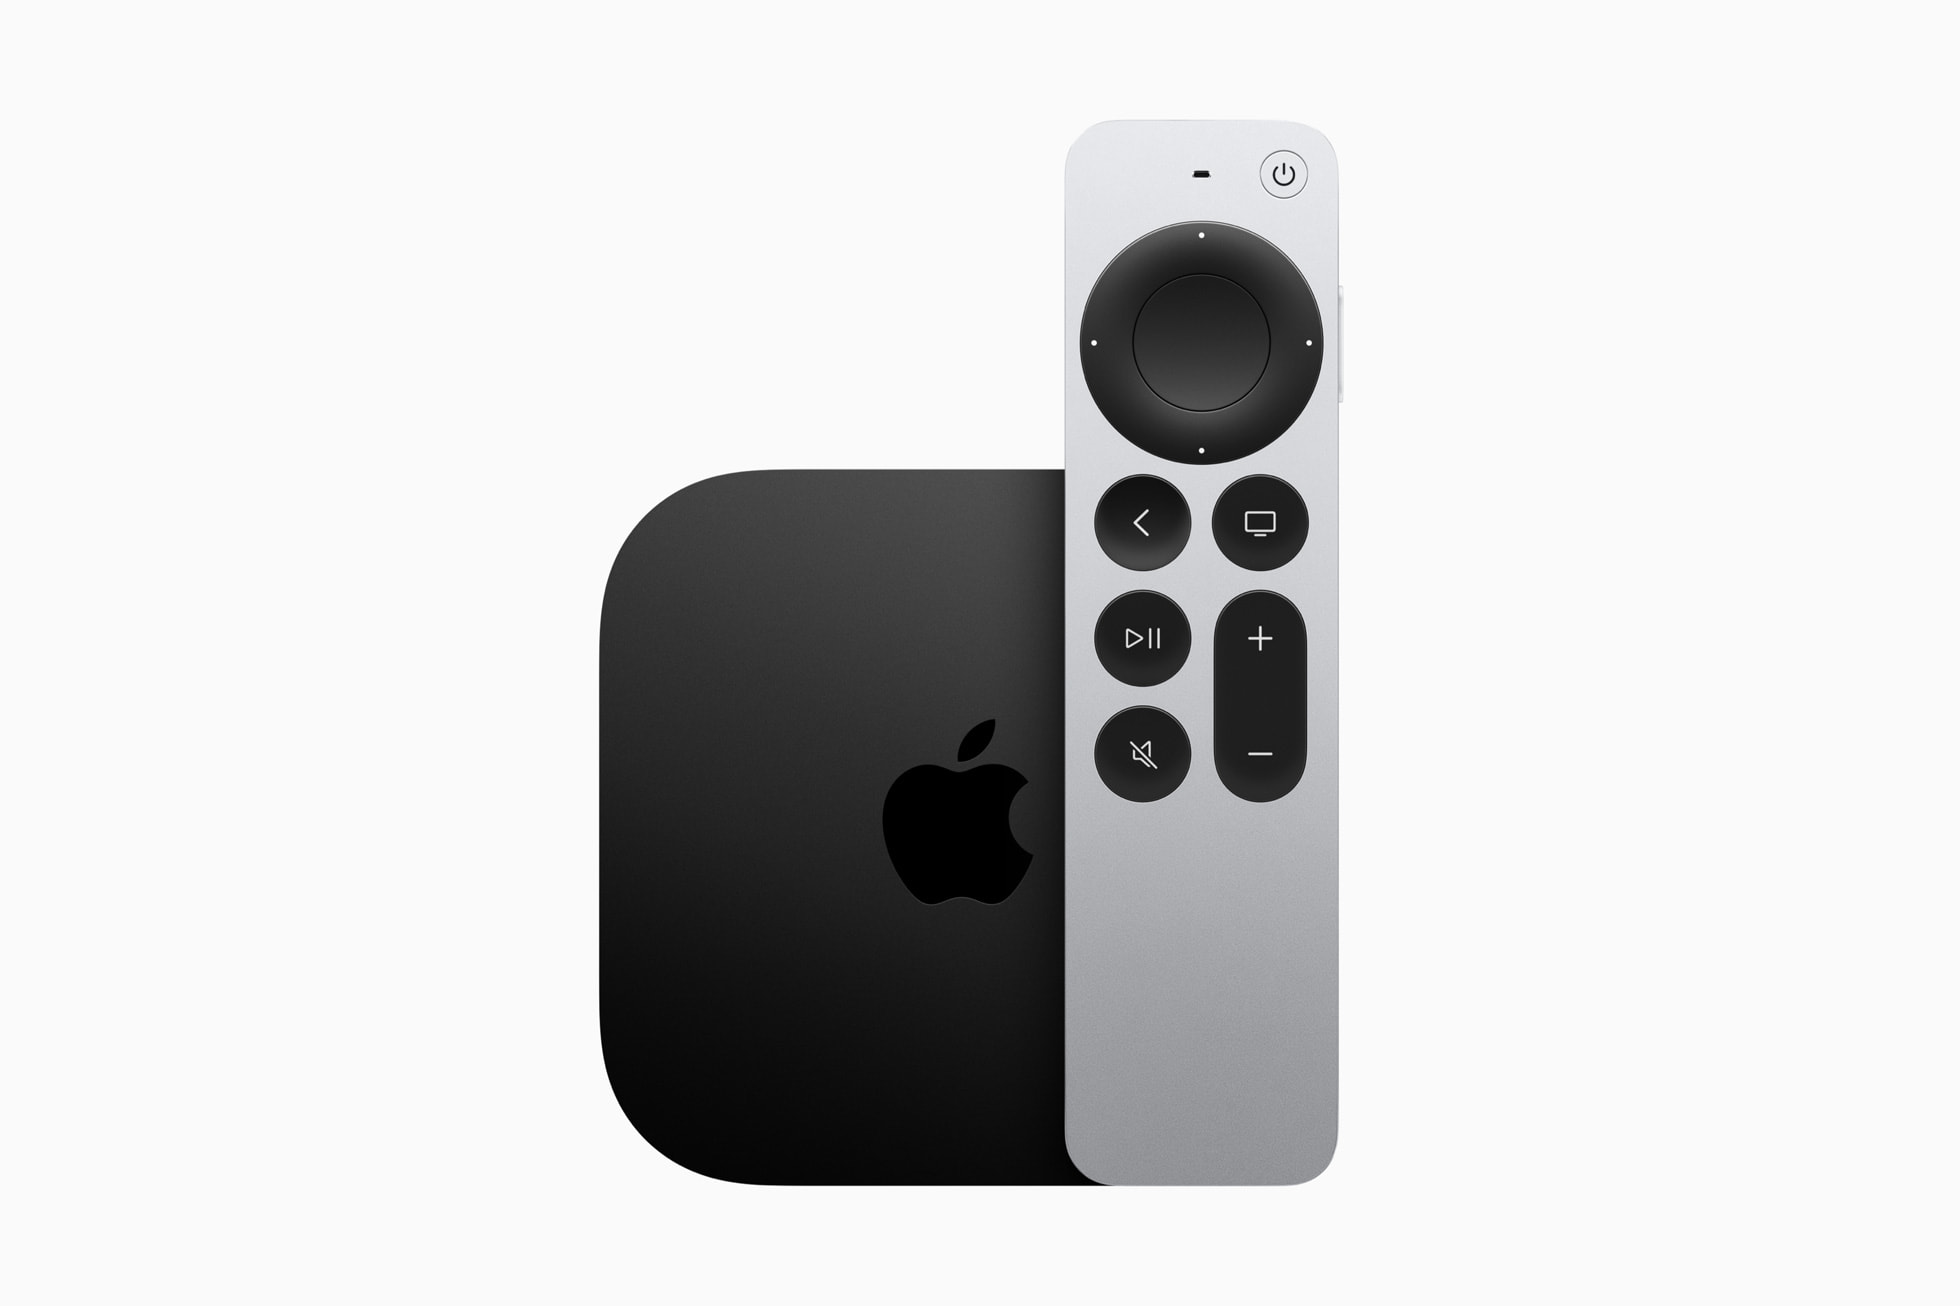 How to preorder the 2022 Apple TV 4K - The Verge